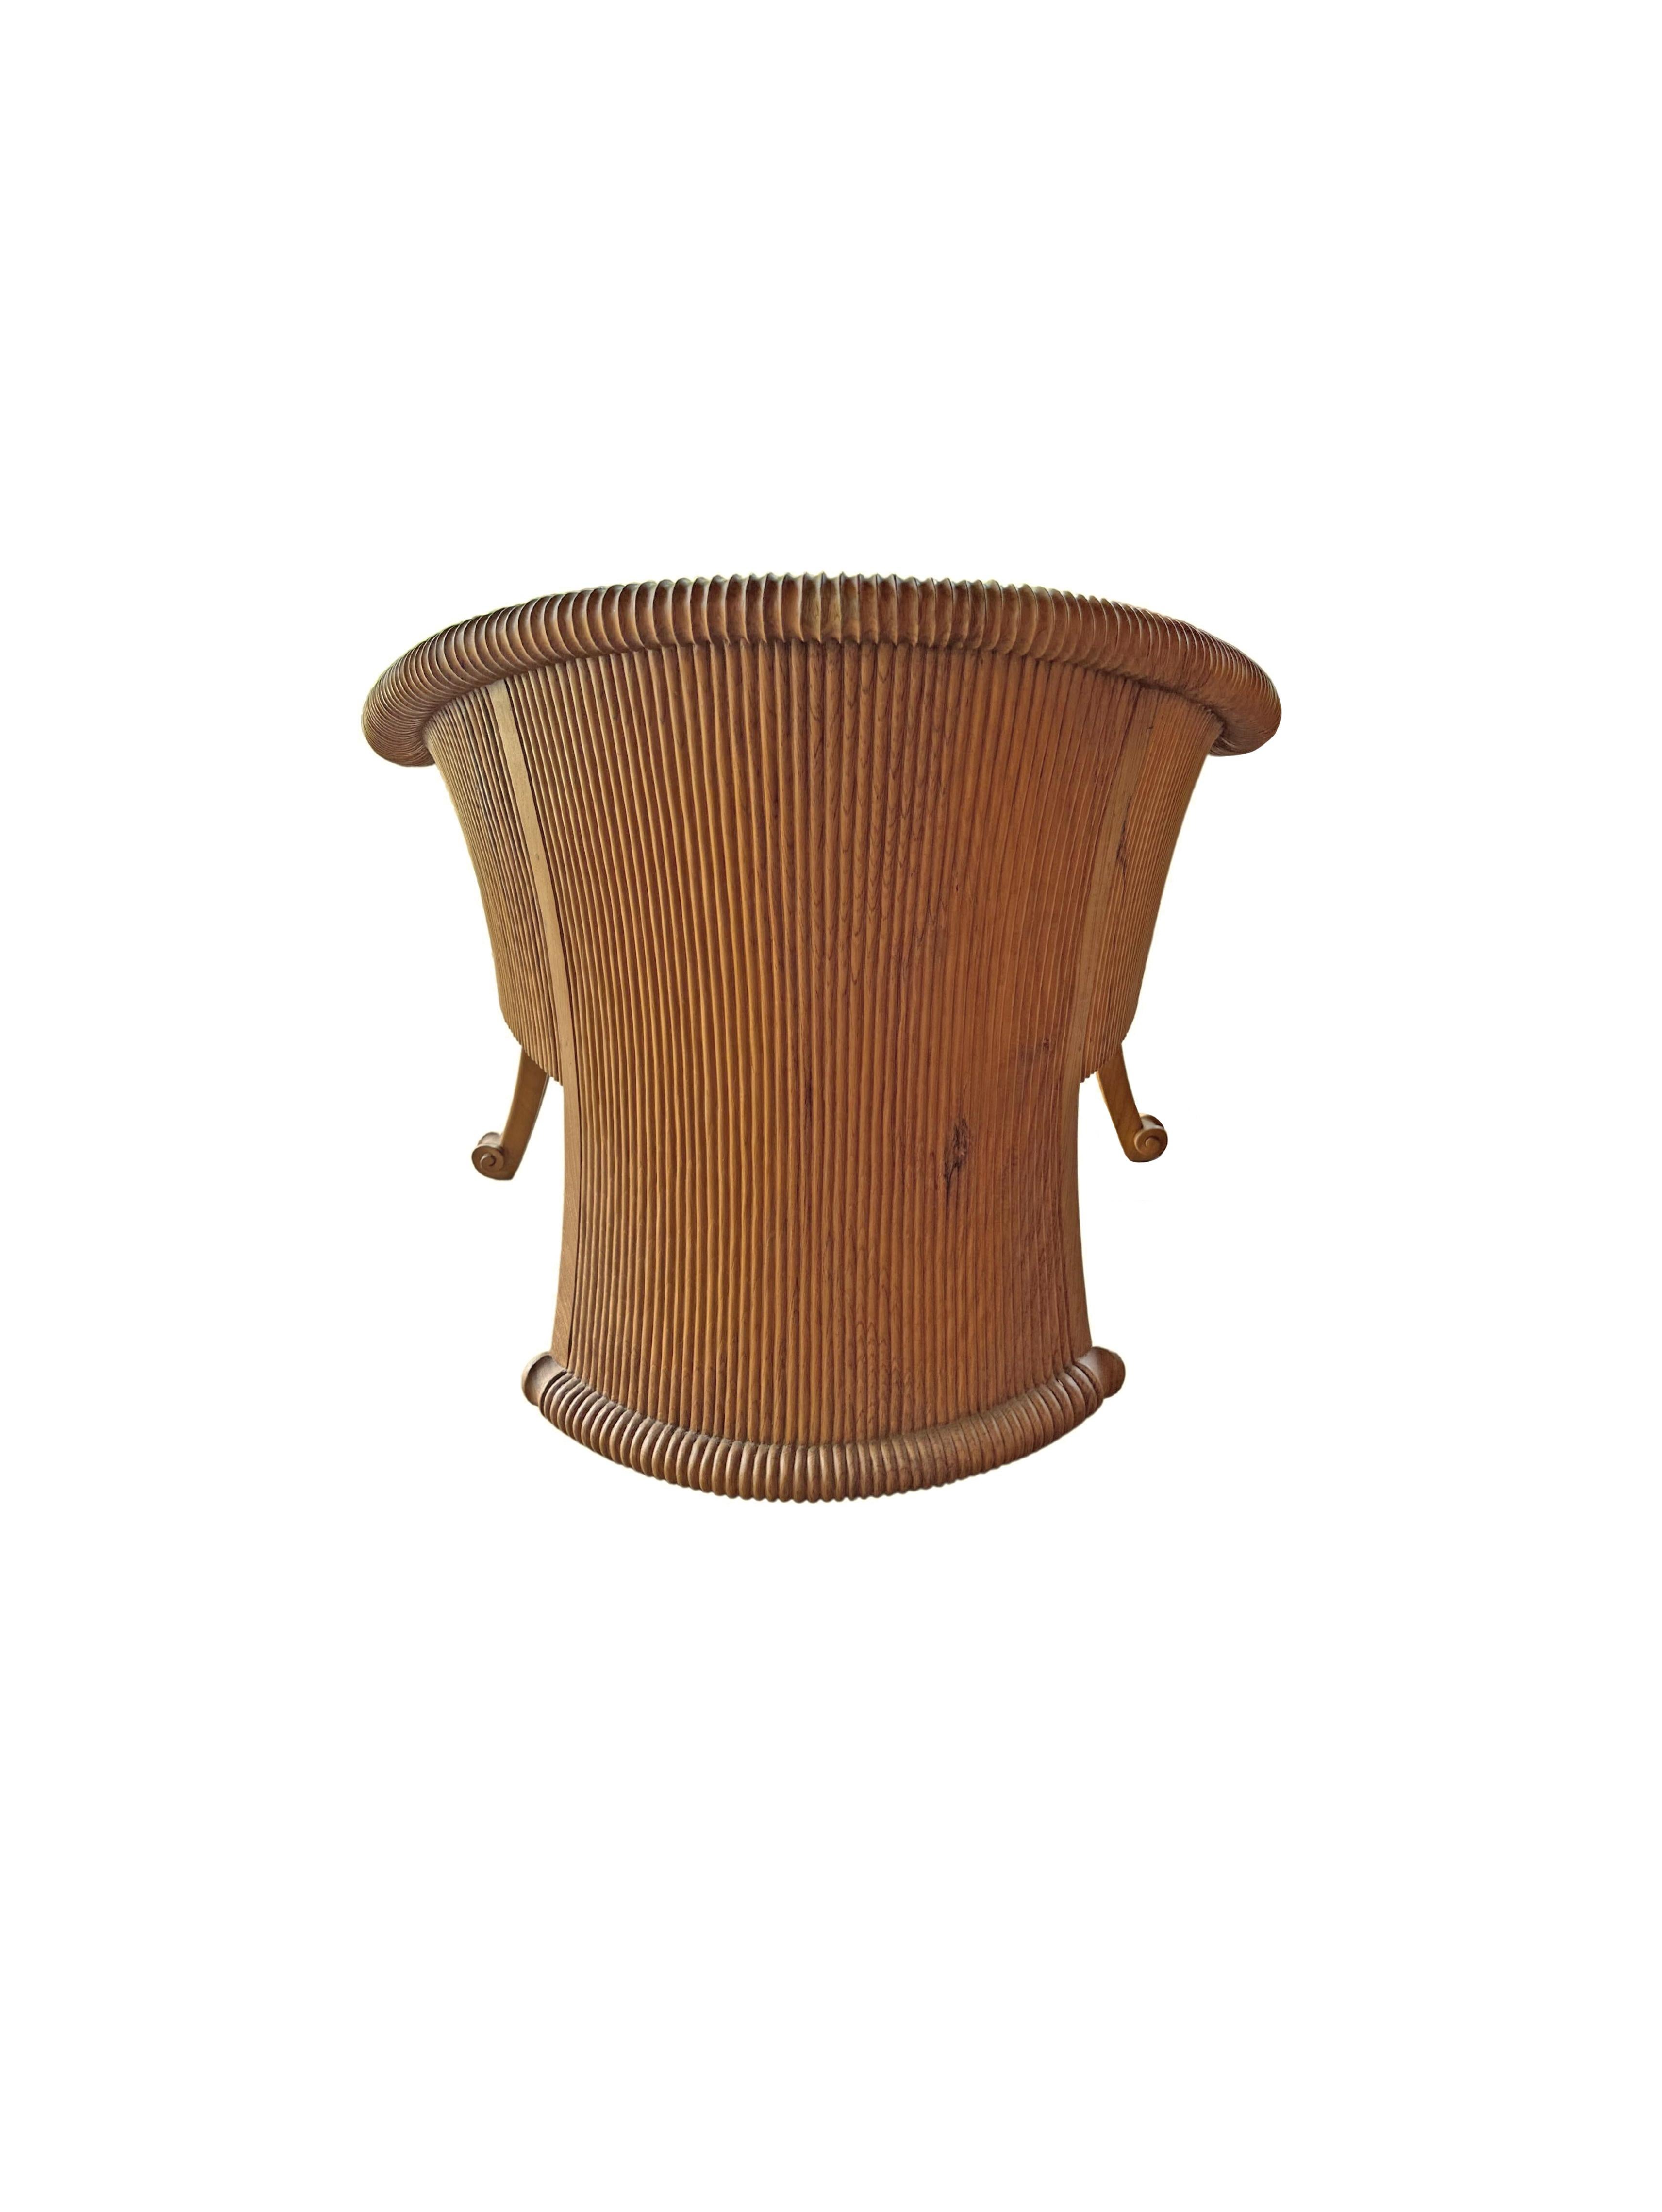 Sculptural Teak Wood Chair with Carved Detailing For Sale 1